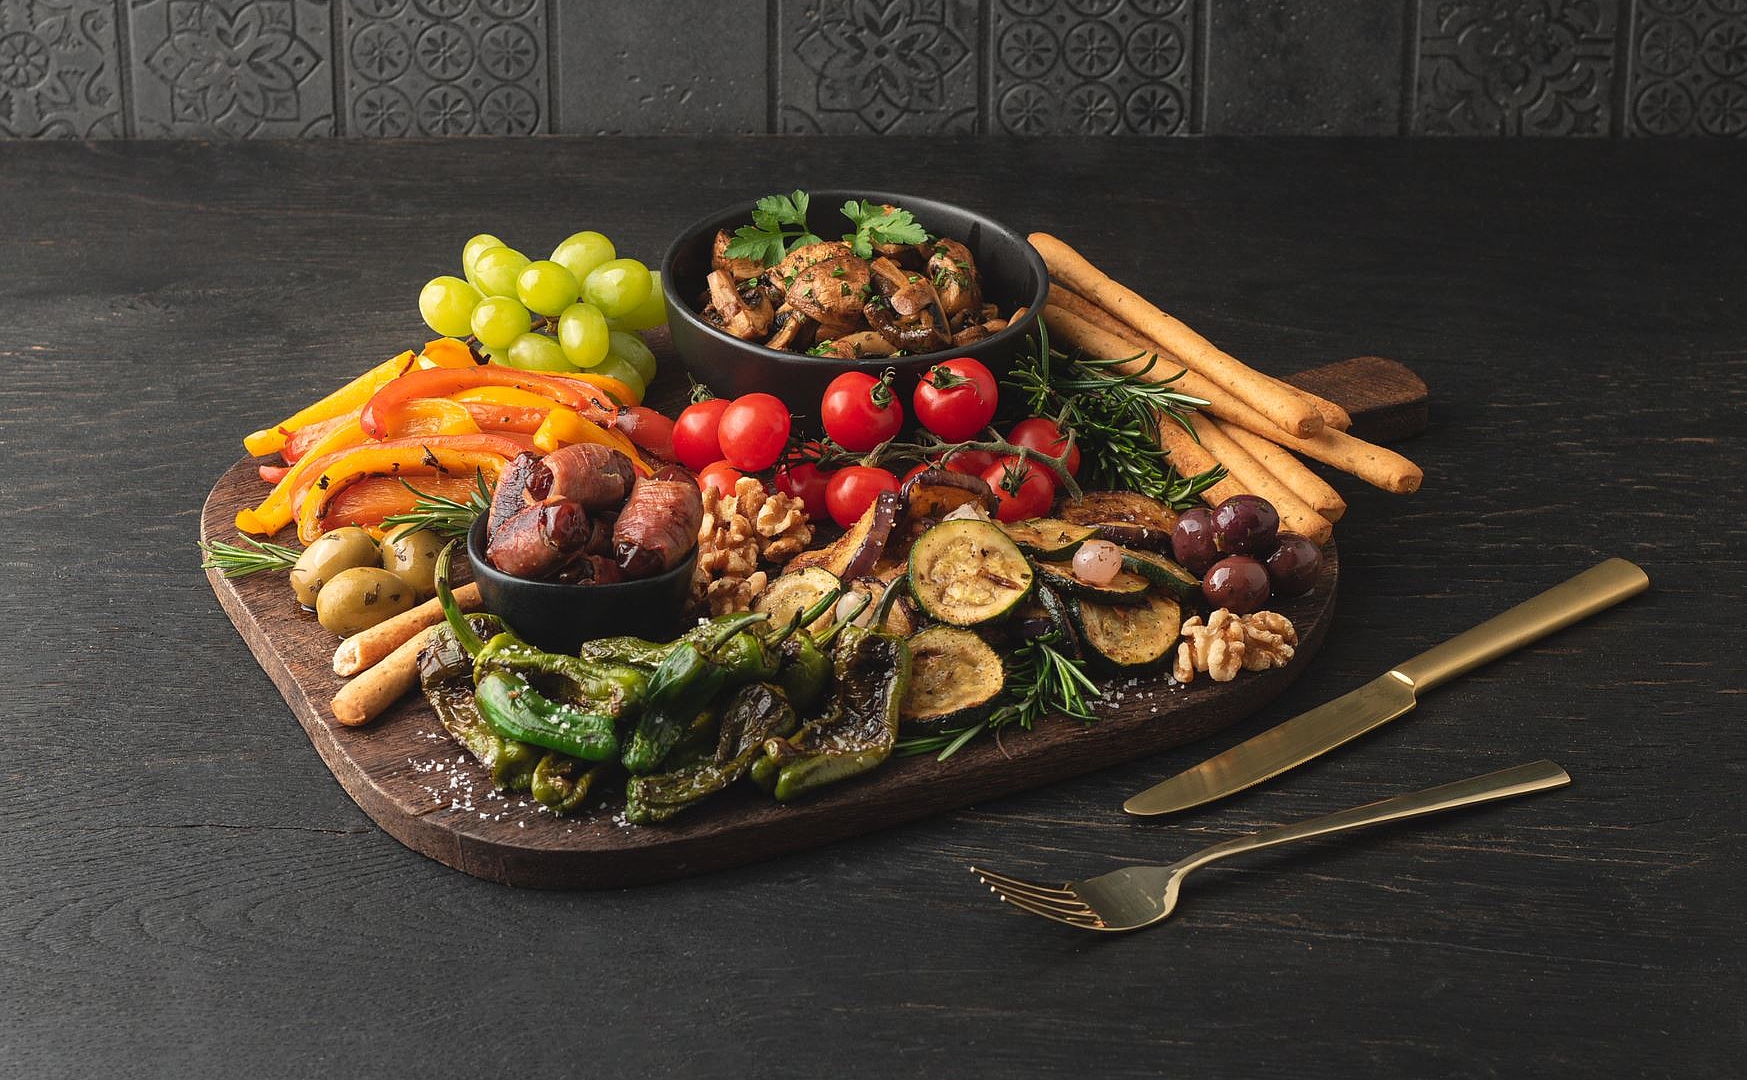 Brighten up your meals with an antipasti platter